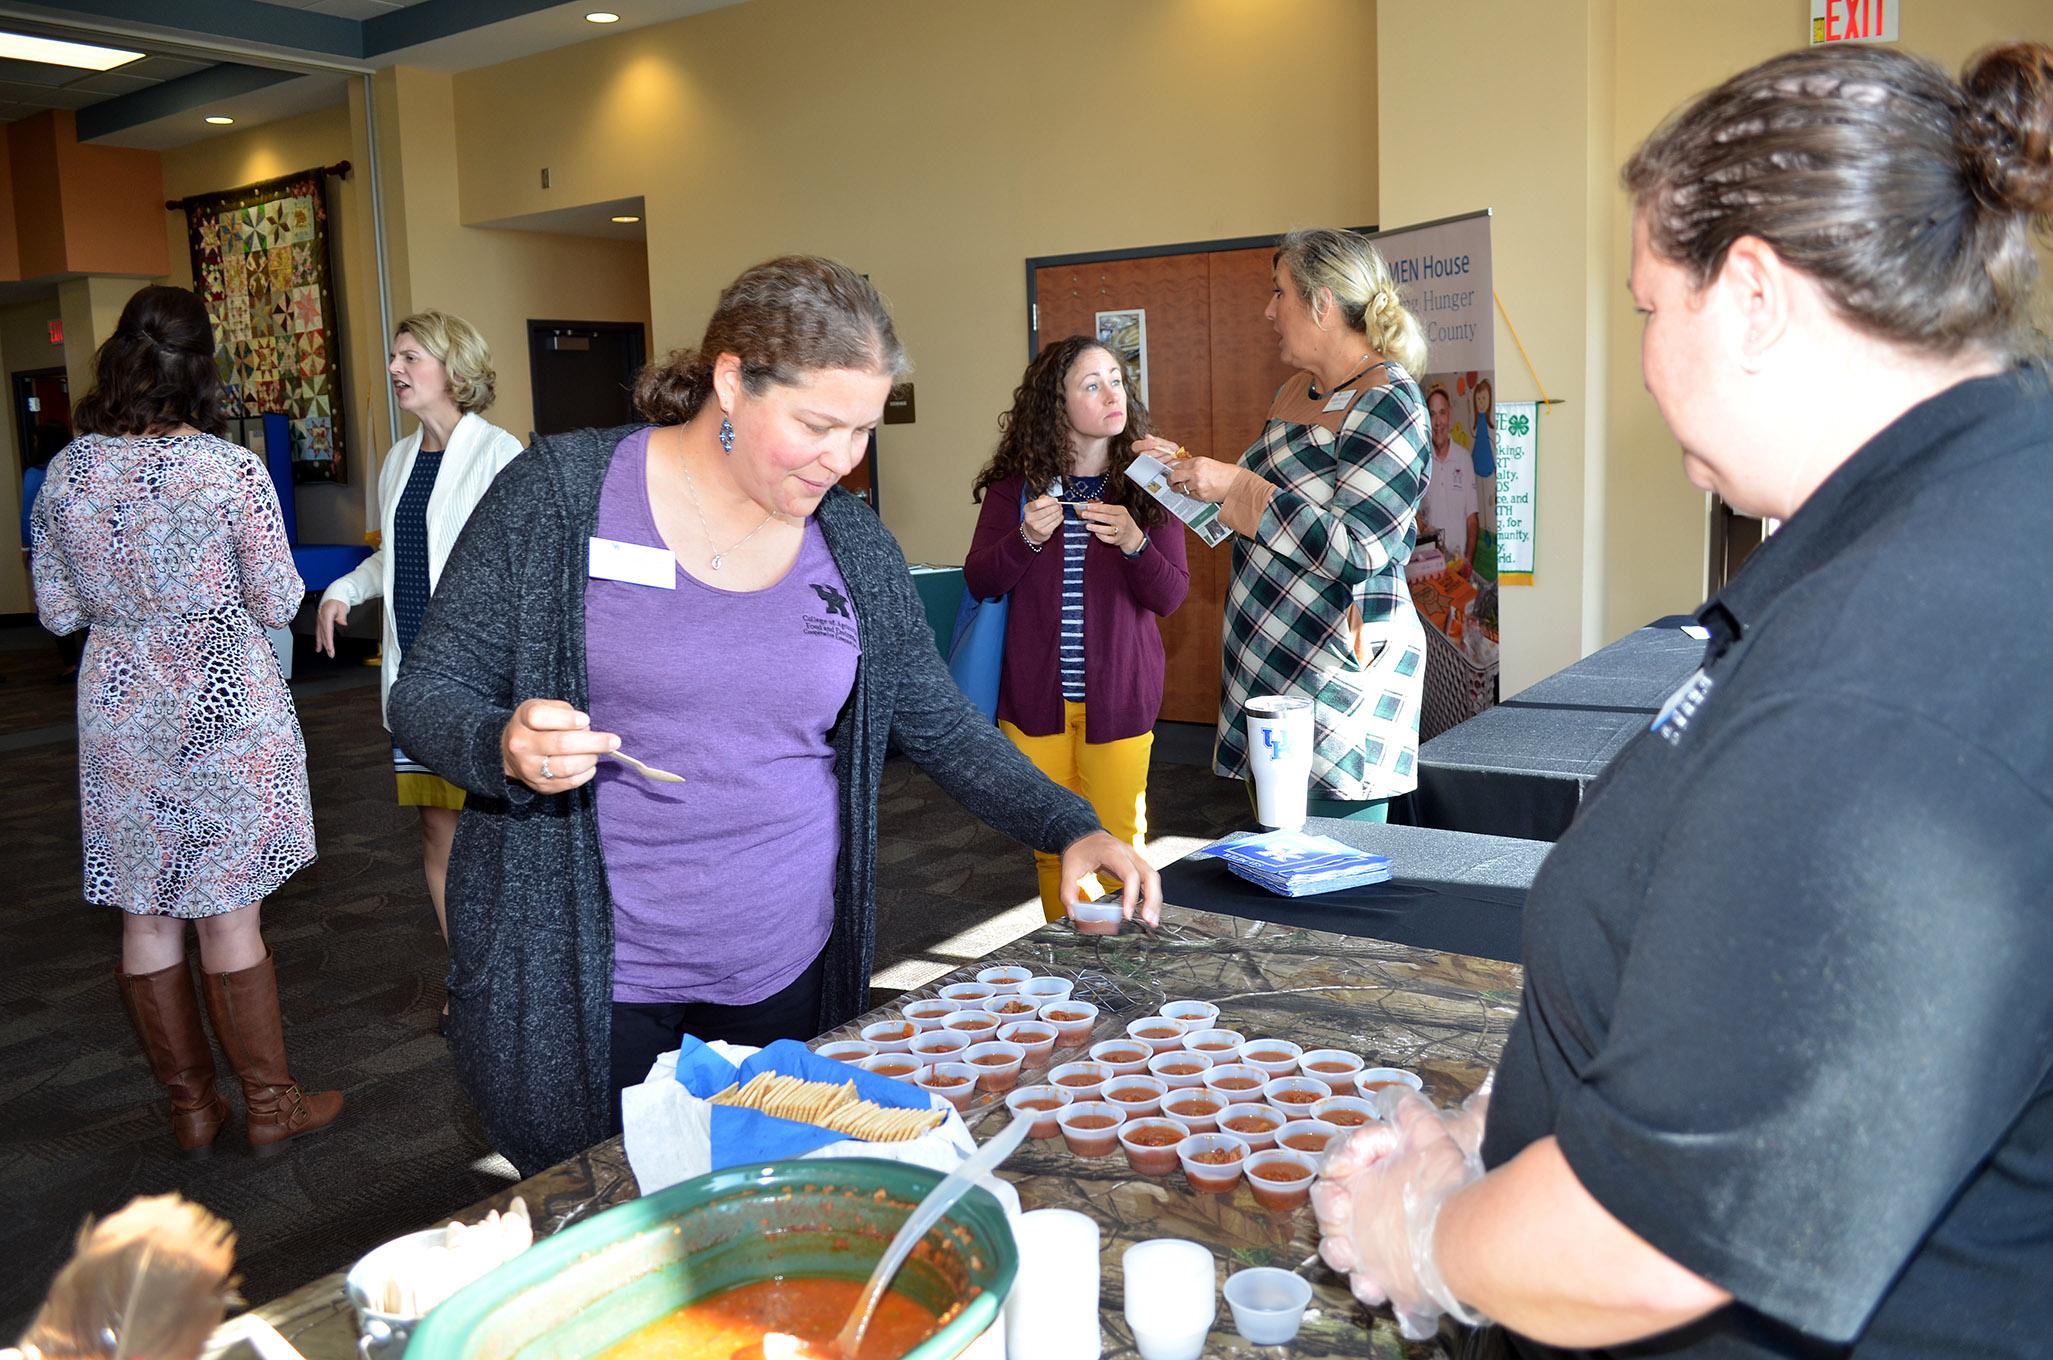 Shonda Johnston, Clark County family and consumer sciences extension agent, tries some venison chili during the recent Cook Wild Kentucky launch party. Photo by Katie Pratt, UK agricultural communications.